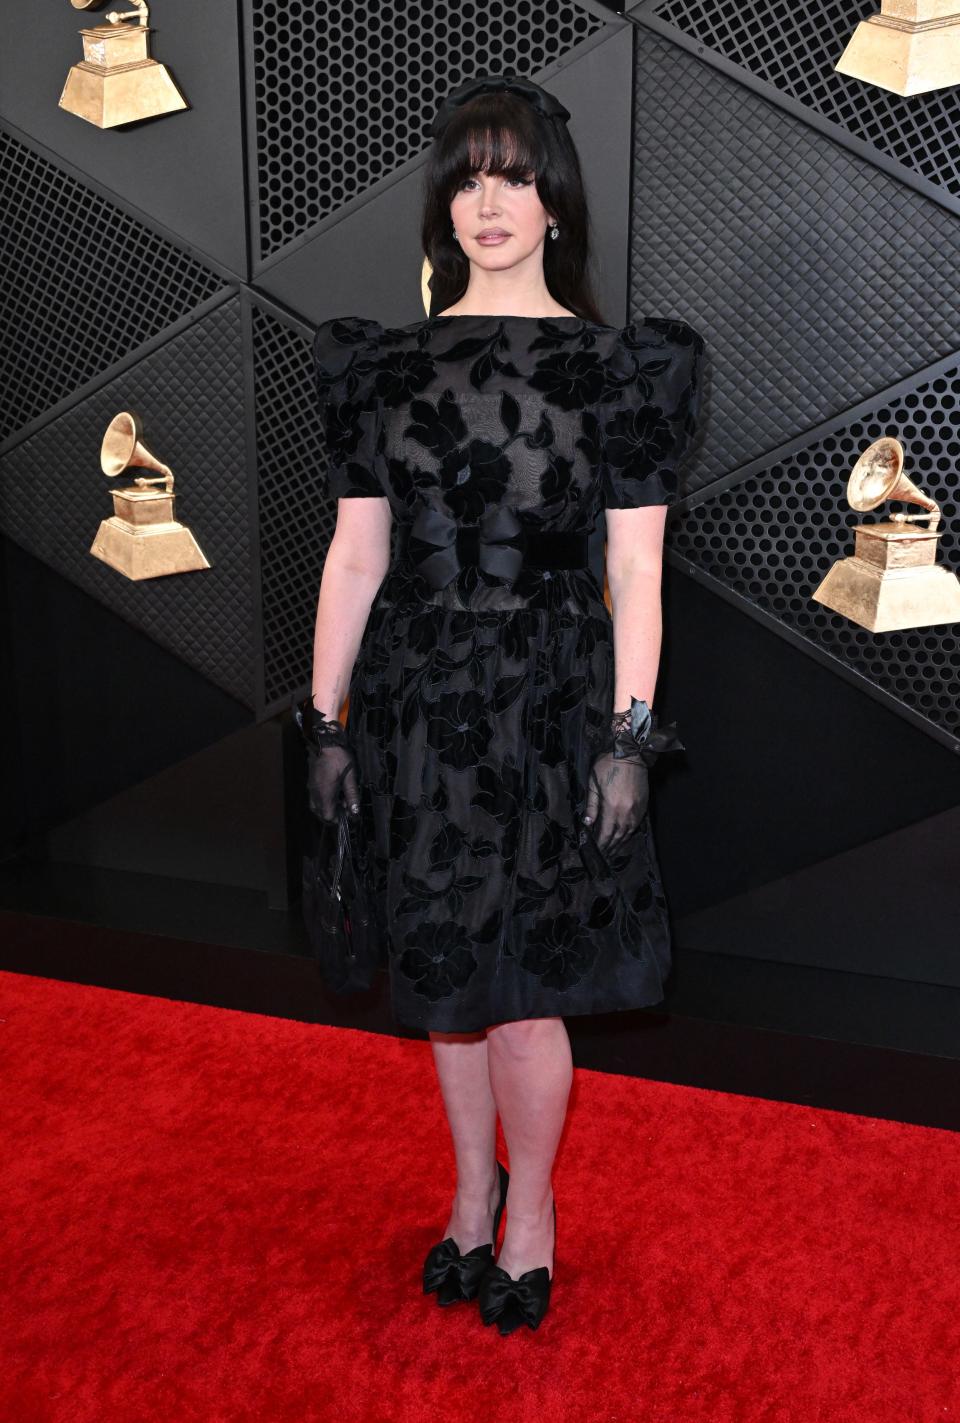 Lana Del Rey at the 66th Annual Grammy Awards at the Crypto.com Arena in Los Angeles.